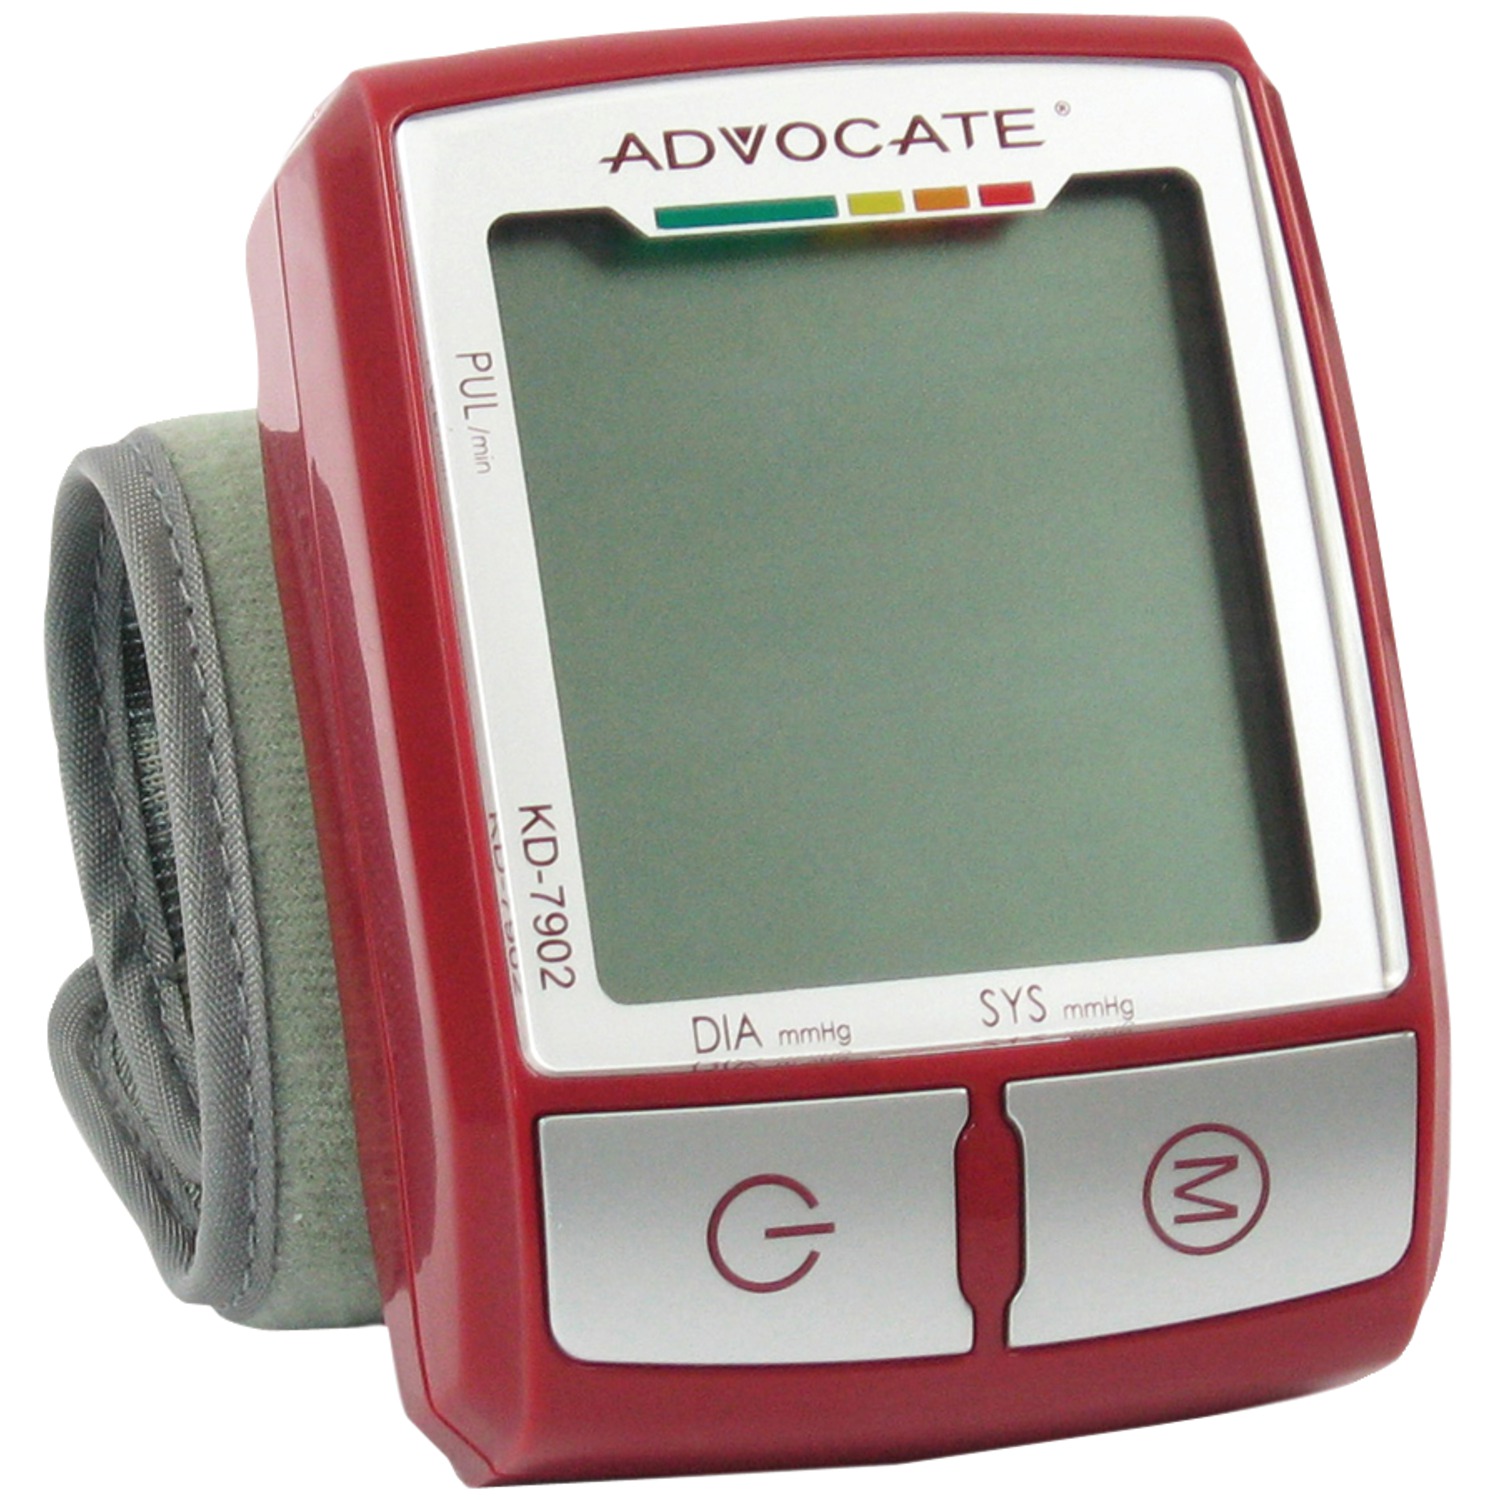 ADVOCATE KD-7902 Wrist Blood Pressure Monitor with Color Indicator - image 2 of 4